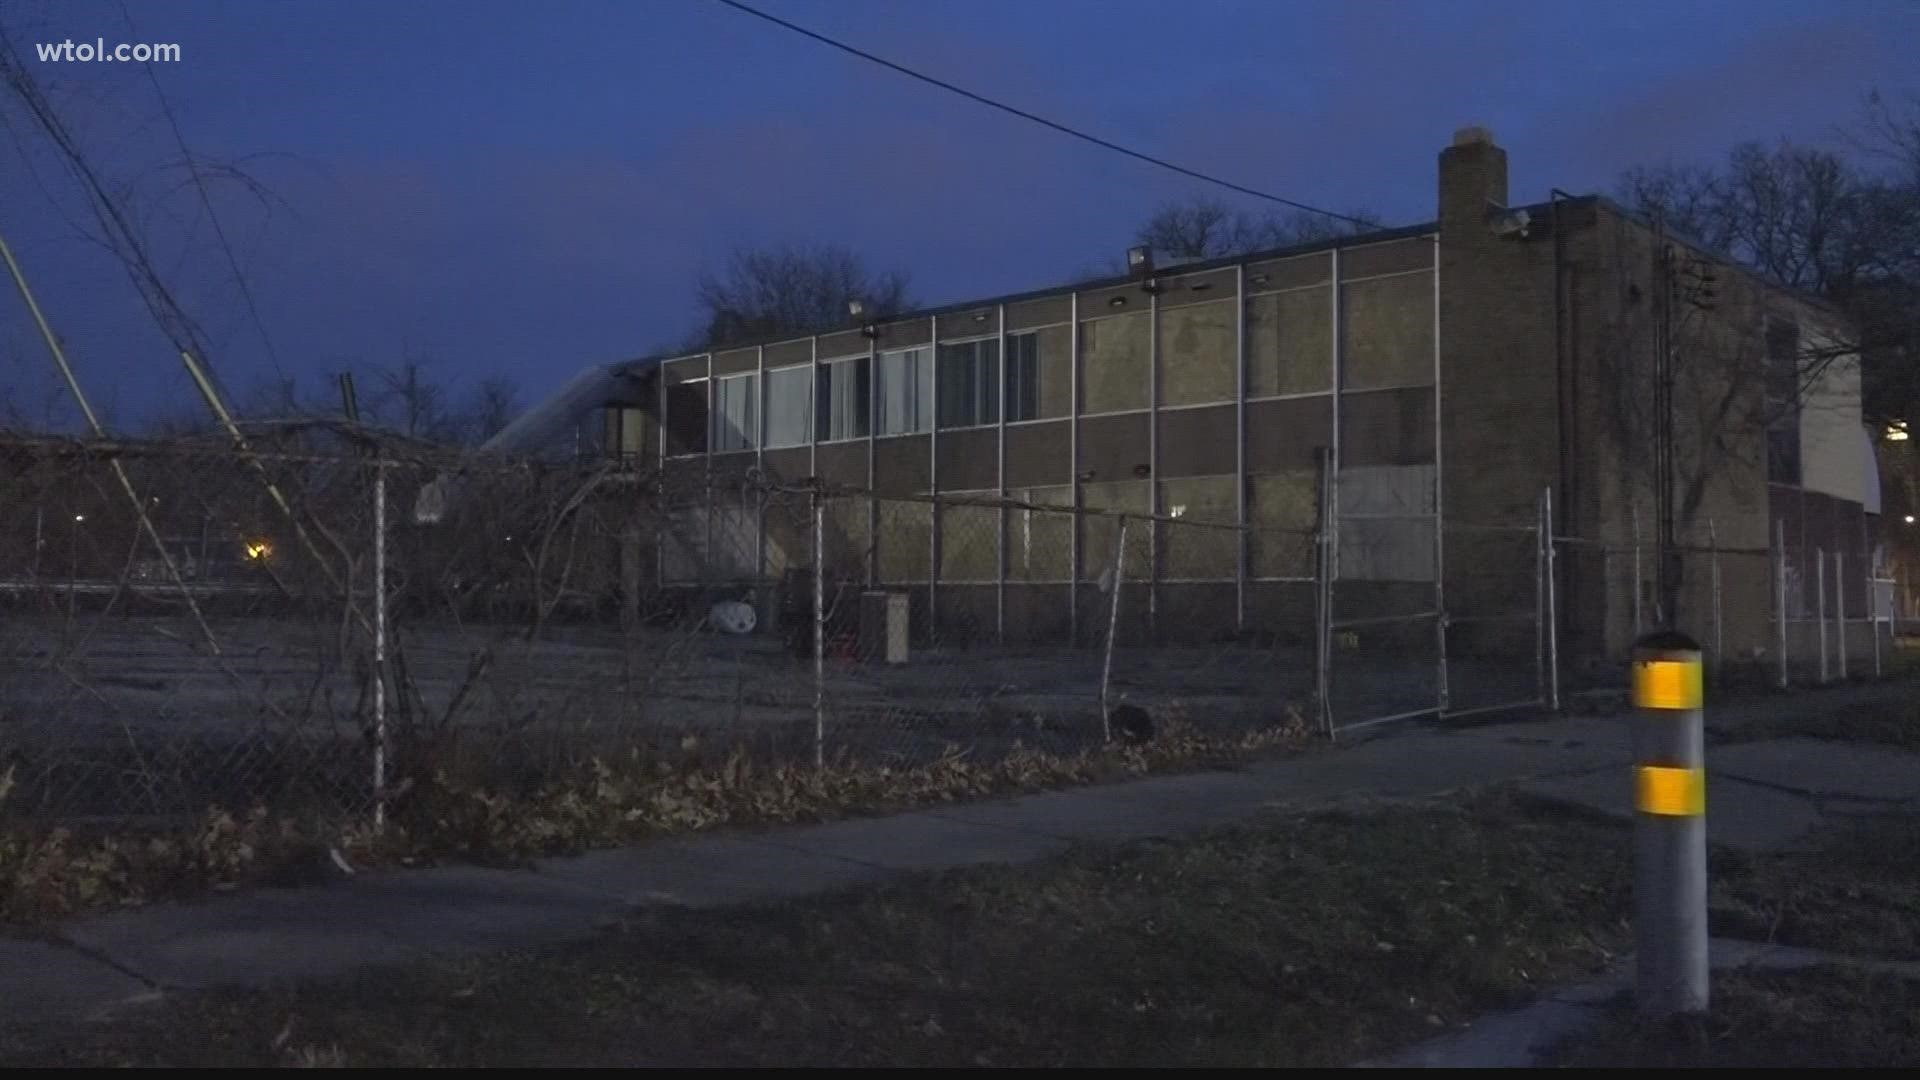 Neighbors want the building converted into something productive for their community.